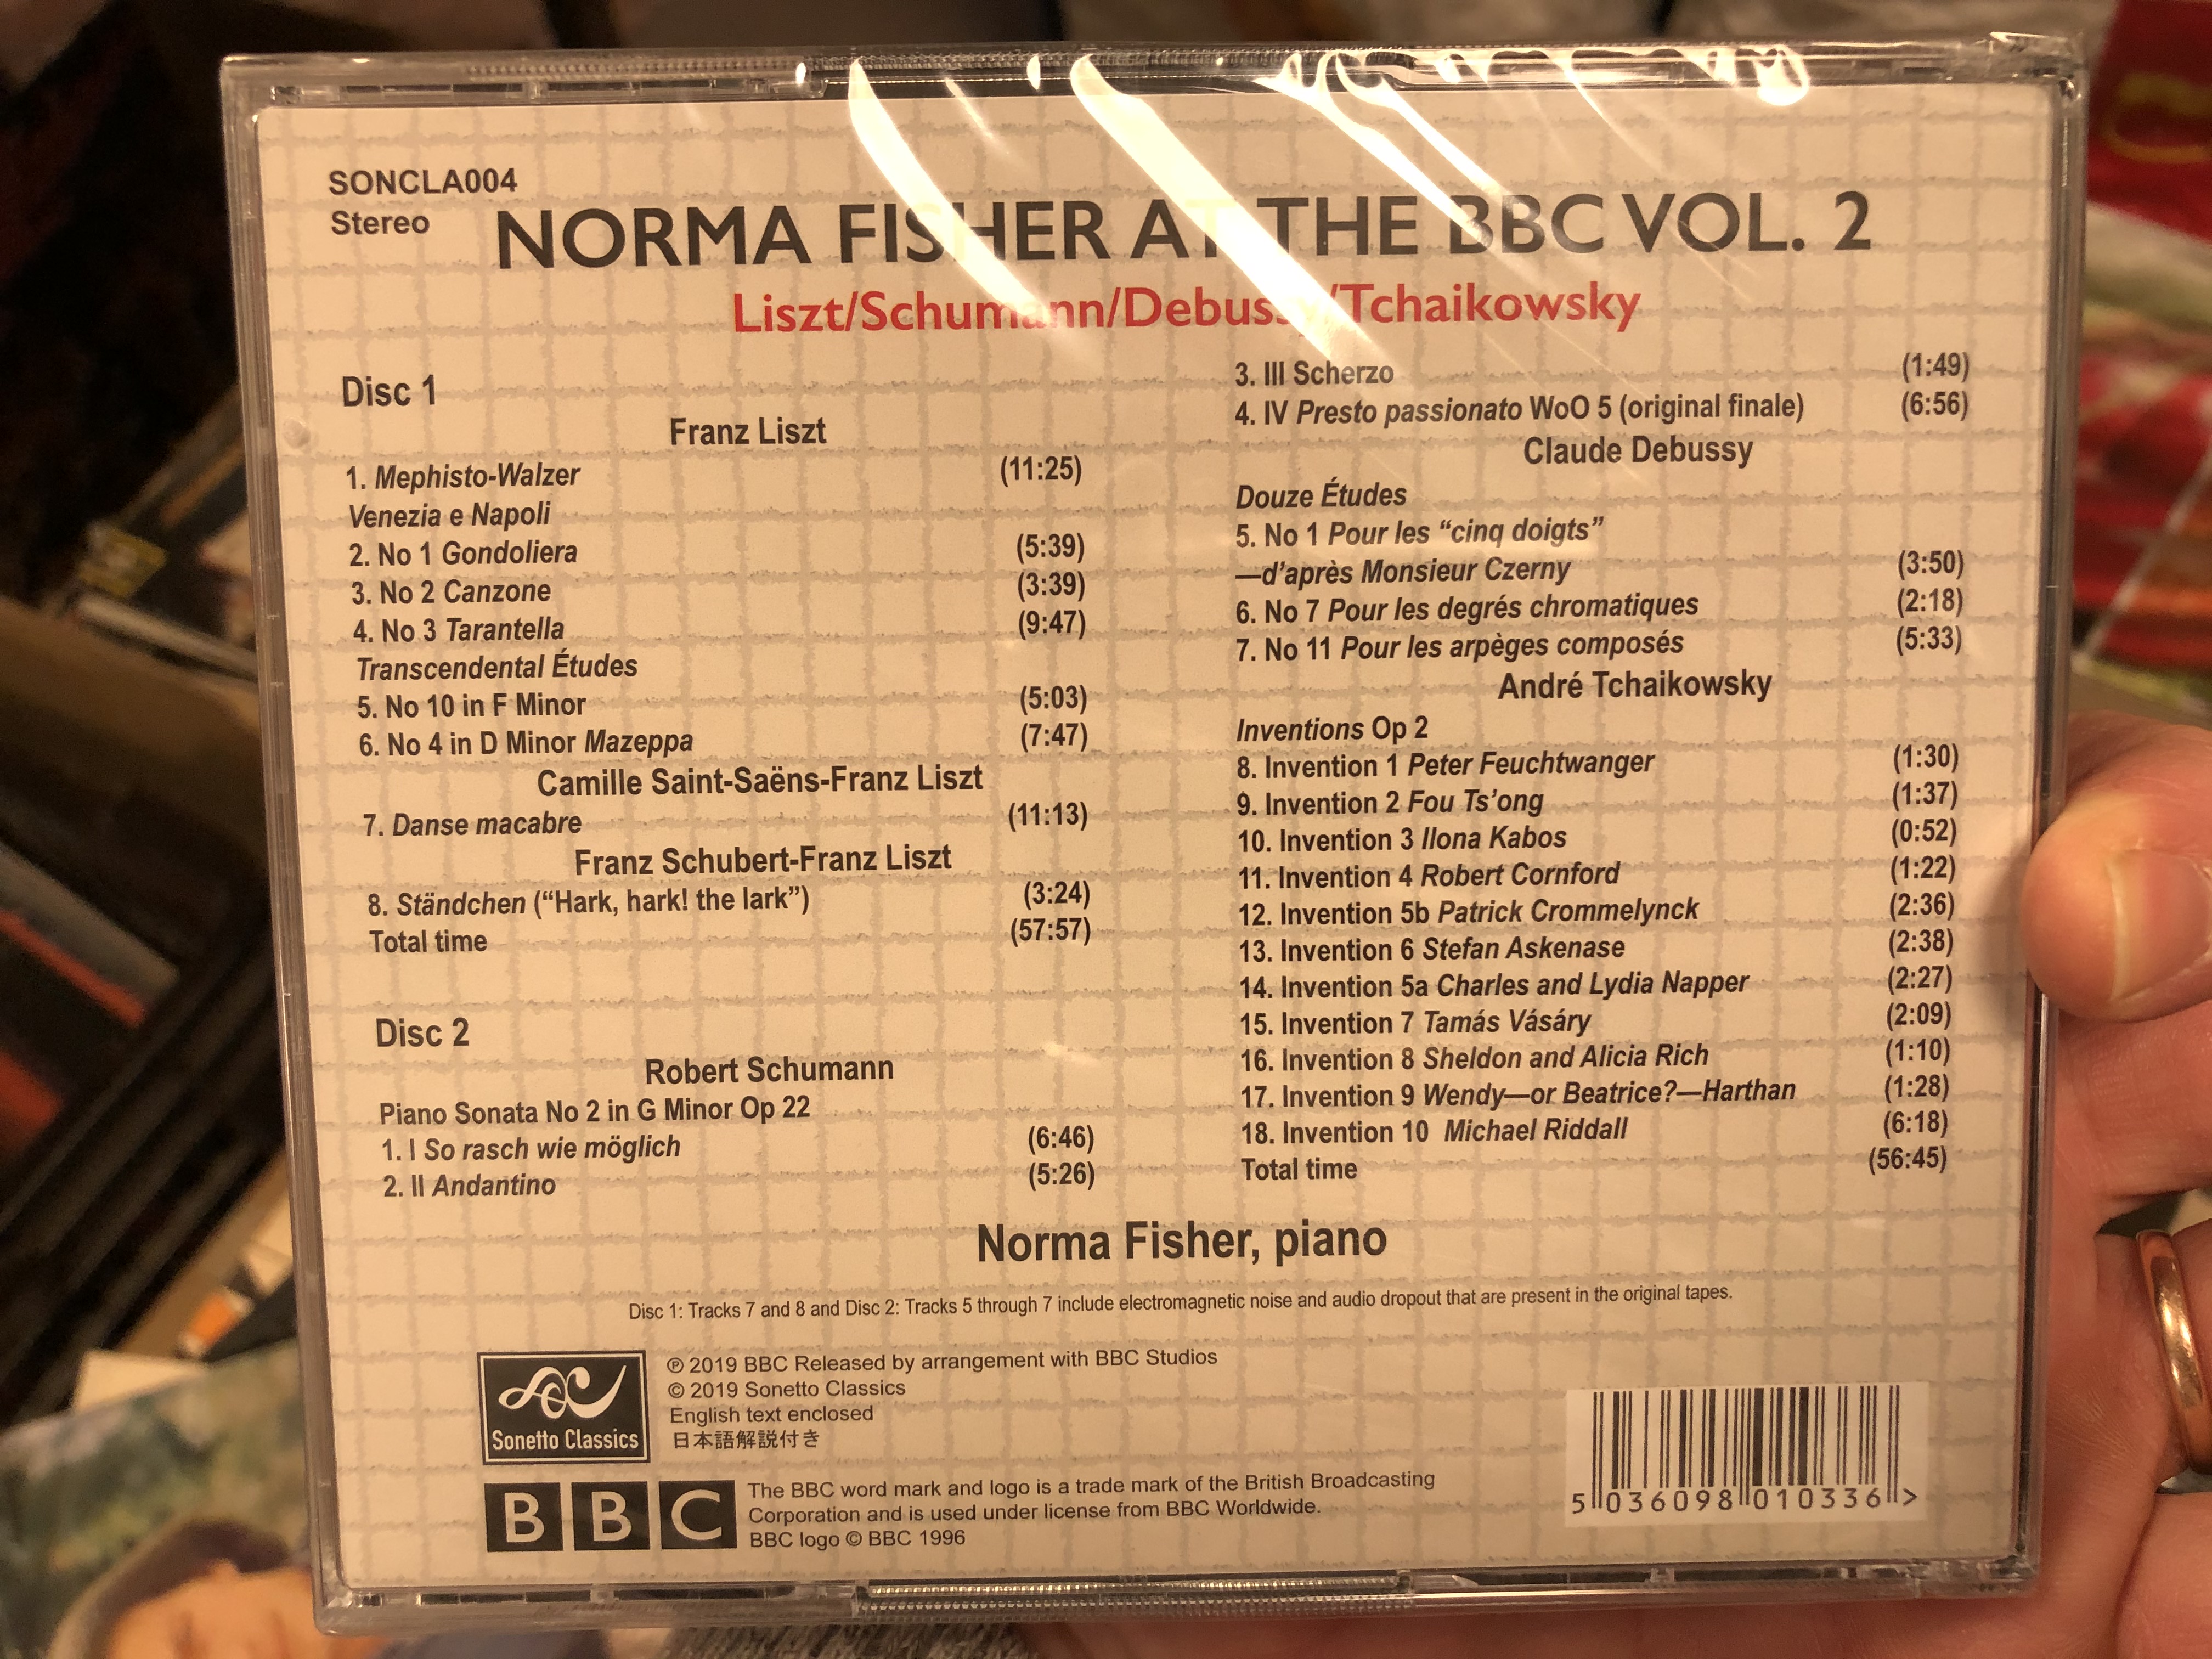 norma-fisher-at-the-bbc-vol.-2-liszt-schumann-debussy-tchaikowsky-sonetto-classics-audio-cd-2019-soncla004-2-.jpg